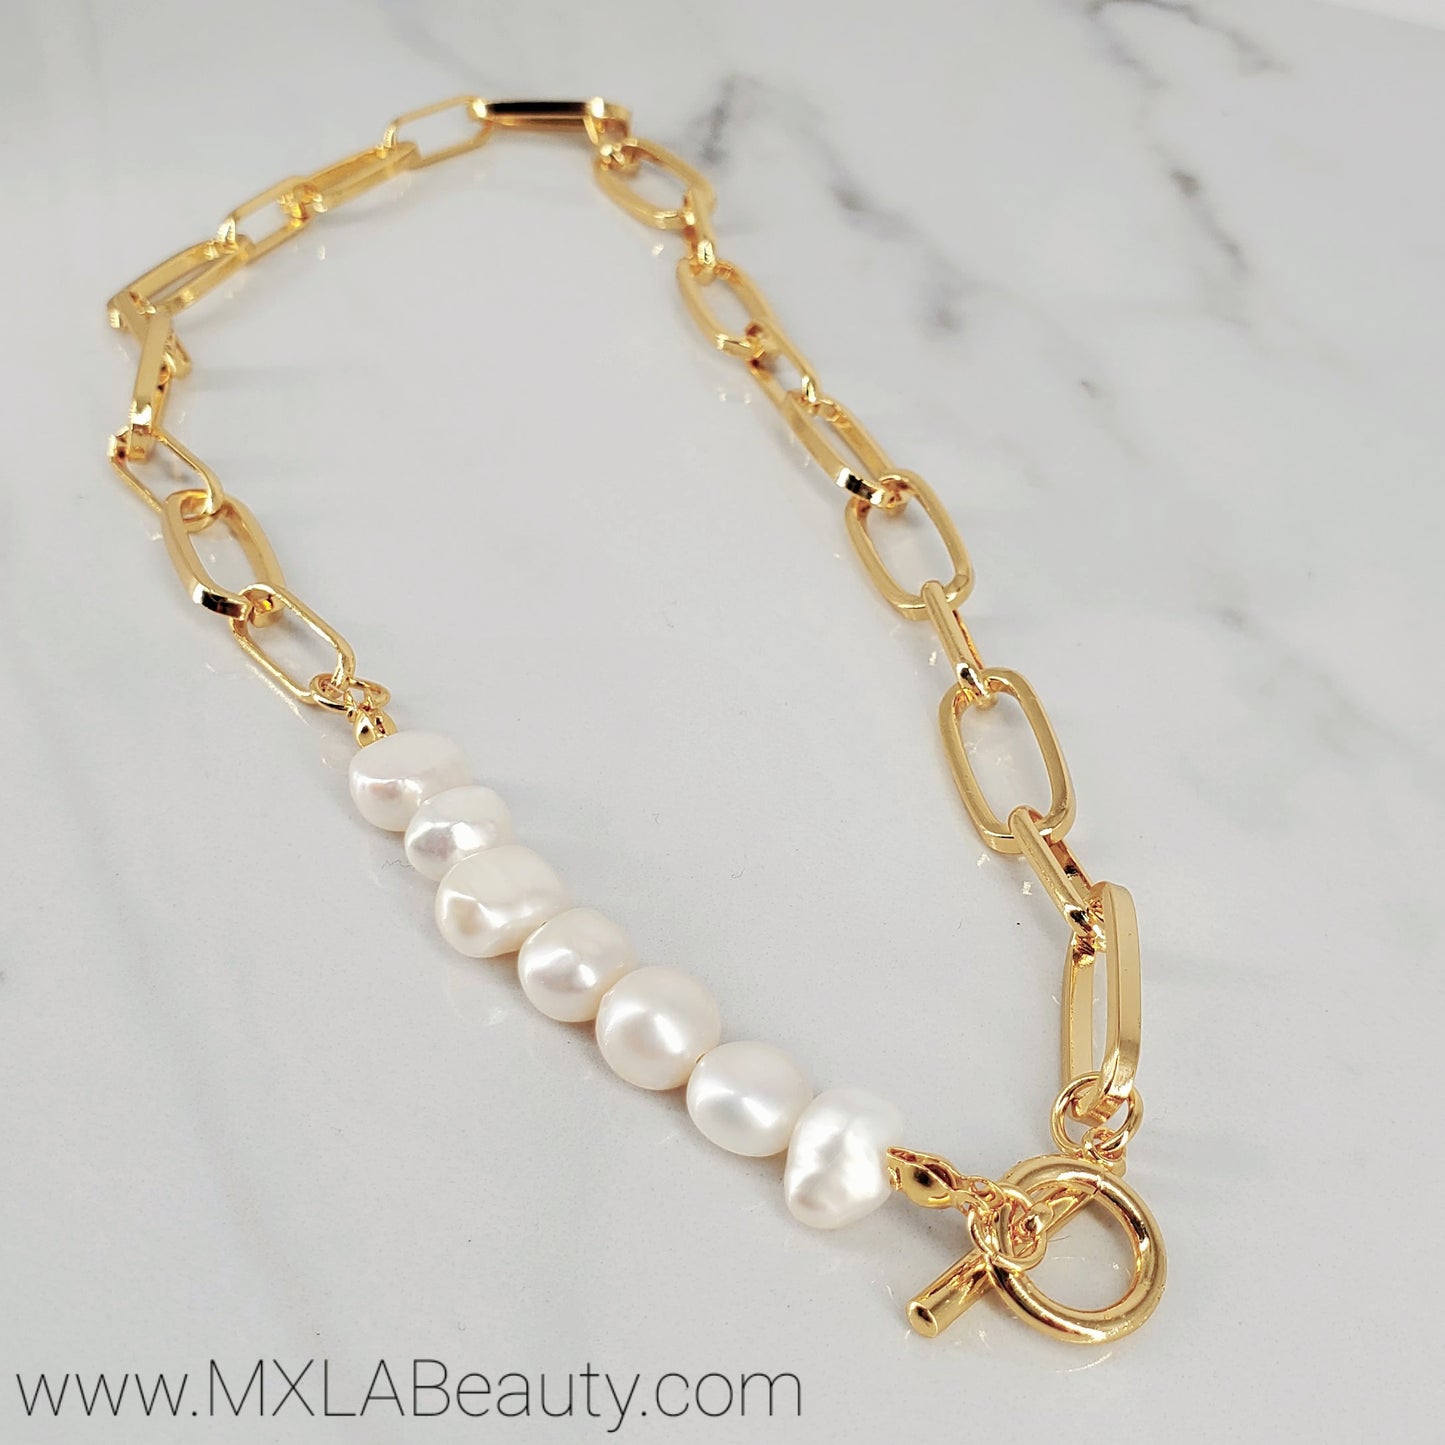 Pearls & Gold Necklace